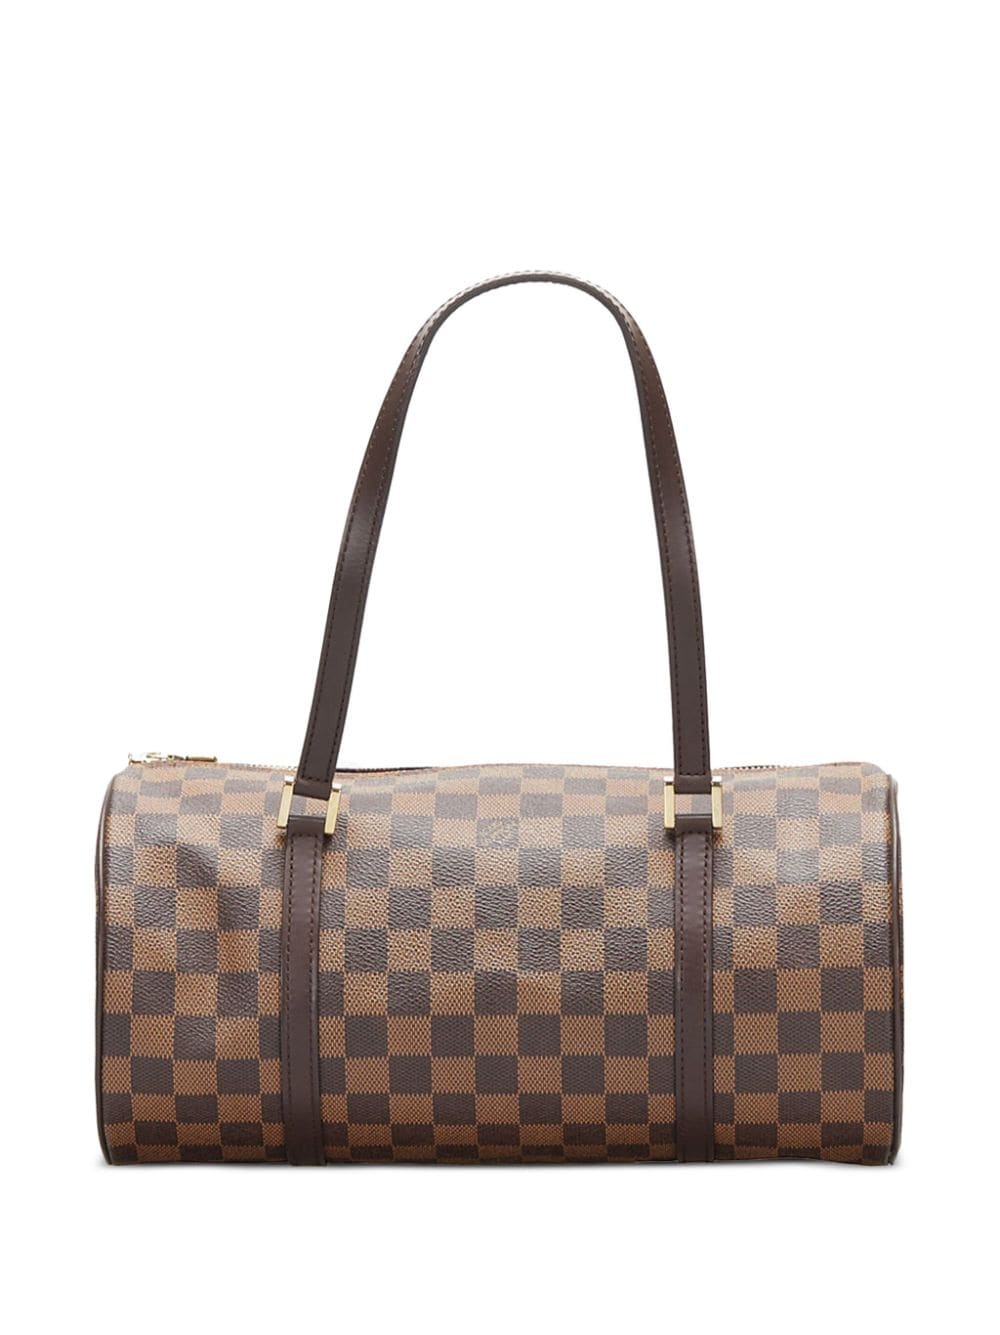 Louis Vuitton Pre-Owned 2003 pre-owned Papillon 30 tote bag - Brown